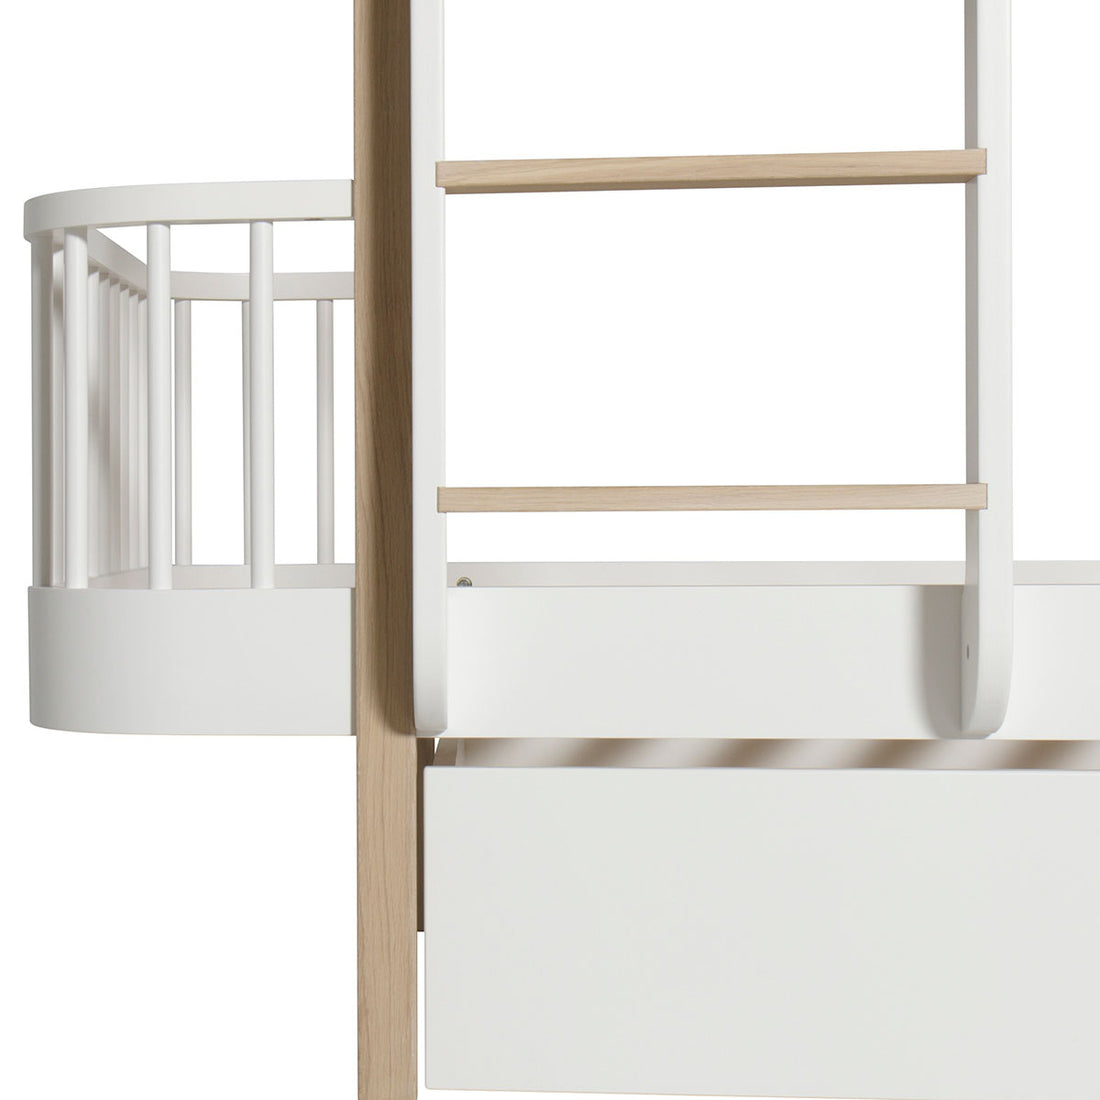 oliver-furniture-wood-drawer-for-wood-bed-day-bed-bunk-bed-white- (4)